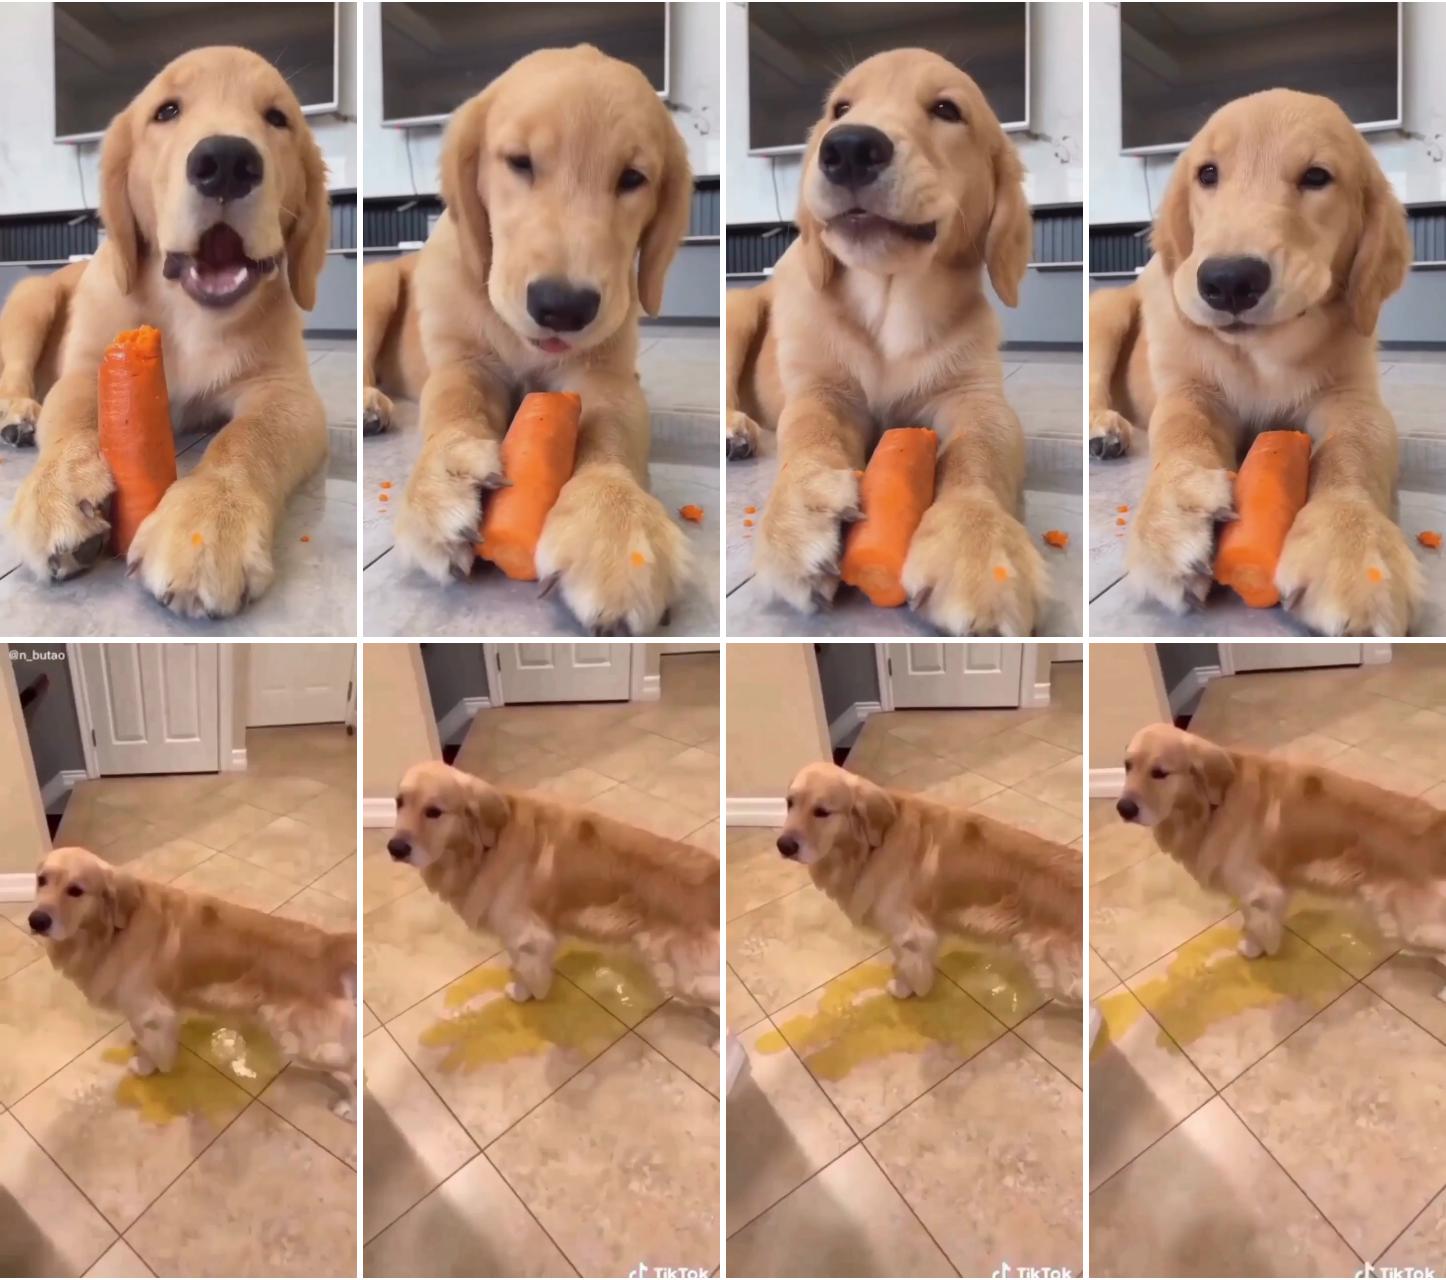 Cute dog eating carrots. yummy; clean up on isle 5... we have a cleanup on isle 5...